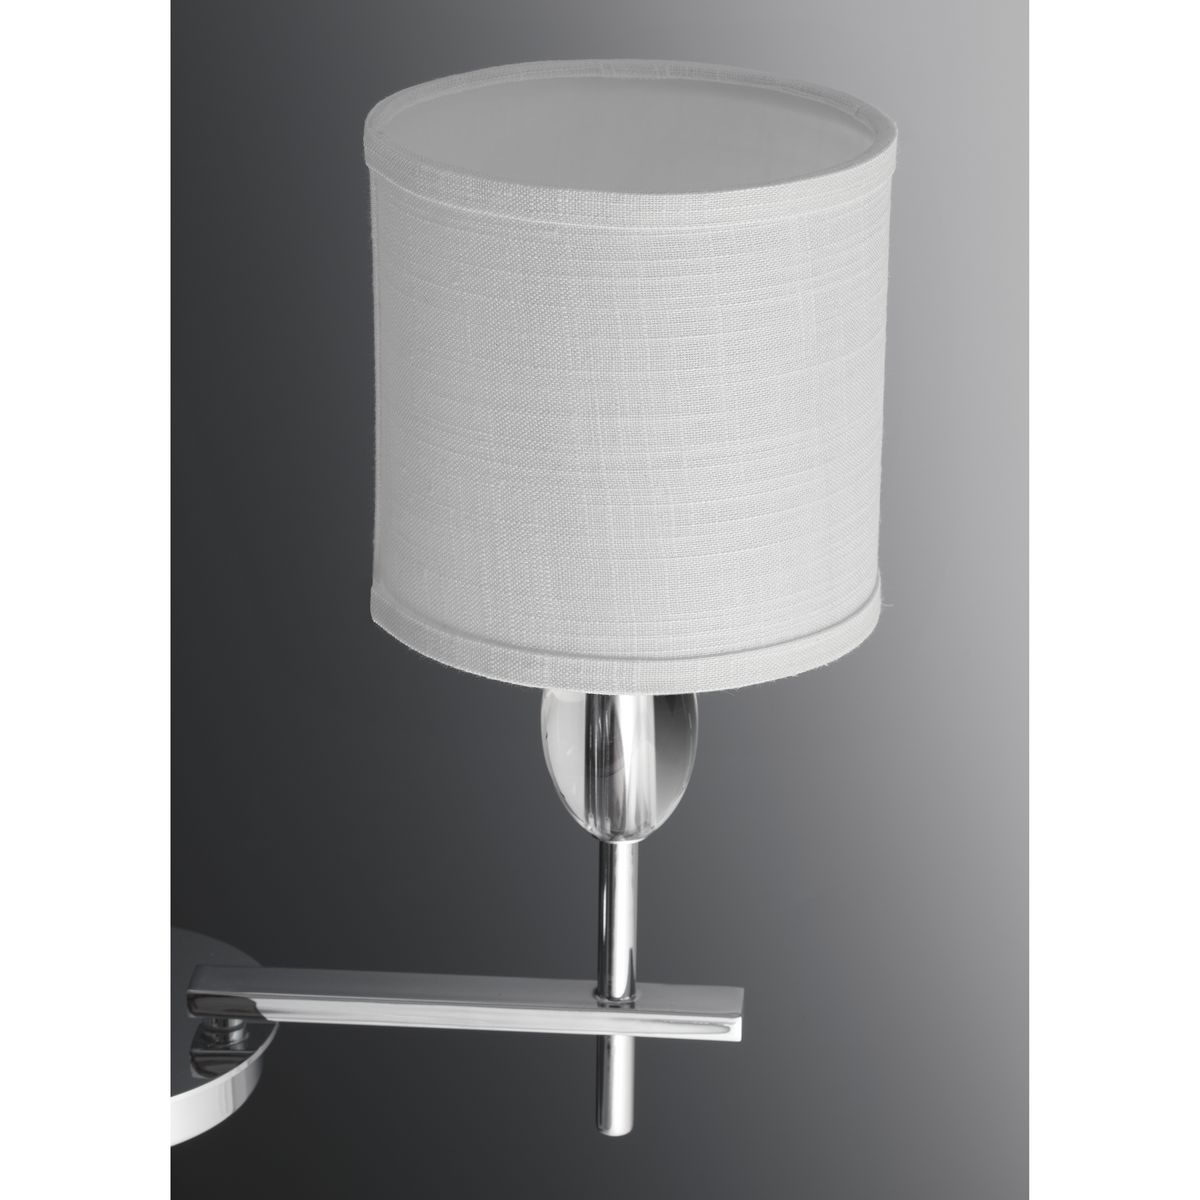 Status Collection 1-Light Polished Chrome Bath Sconce with White Linen Shade  785247183852 